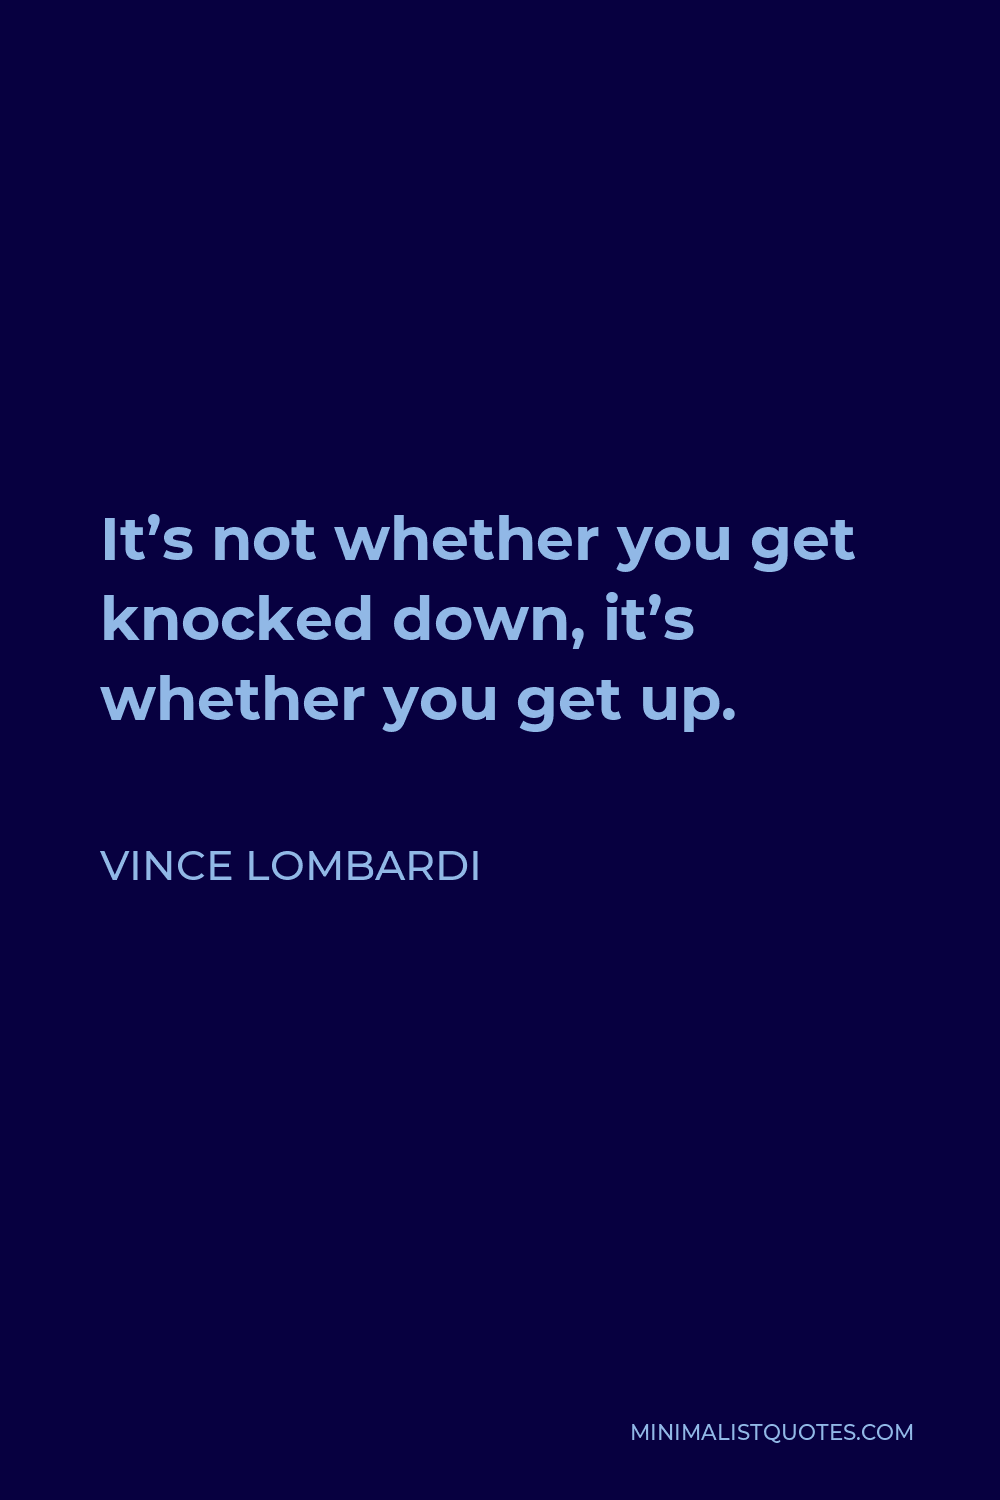 Vince Lombardi Quote - It’s not whether you get knocked down, it’s whether you get up.